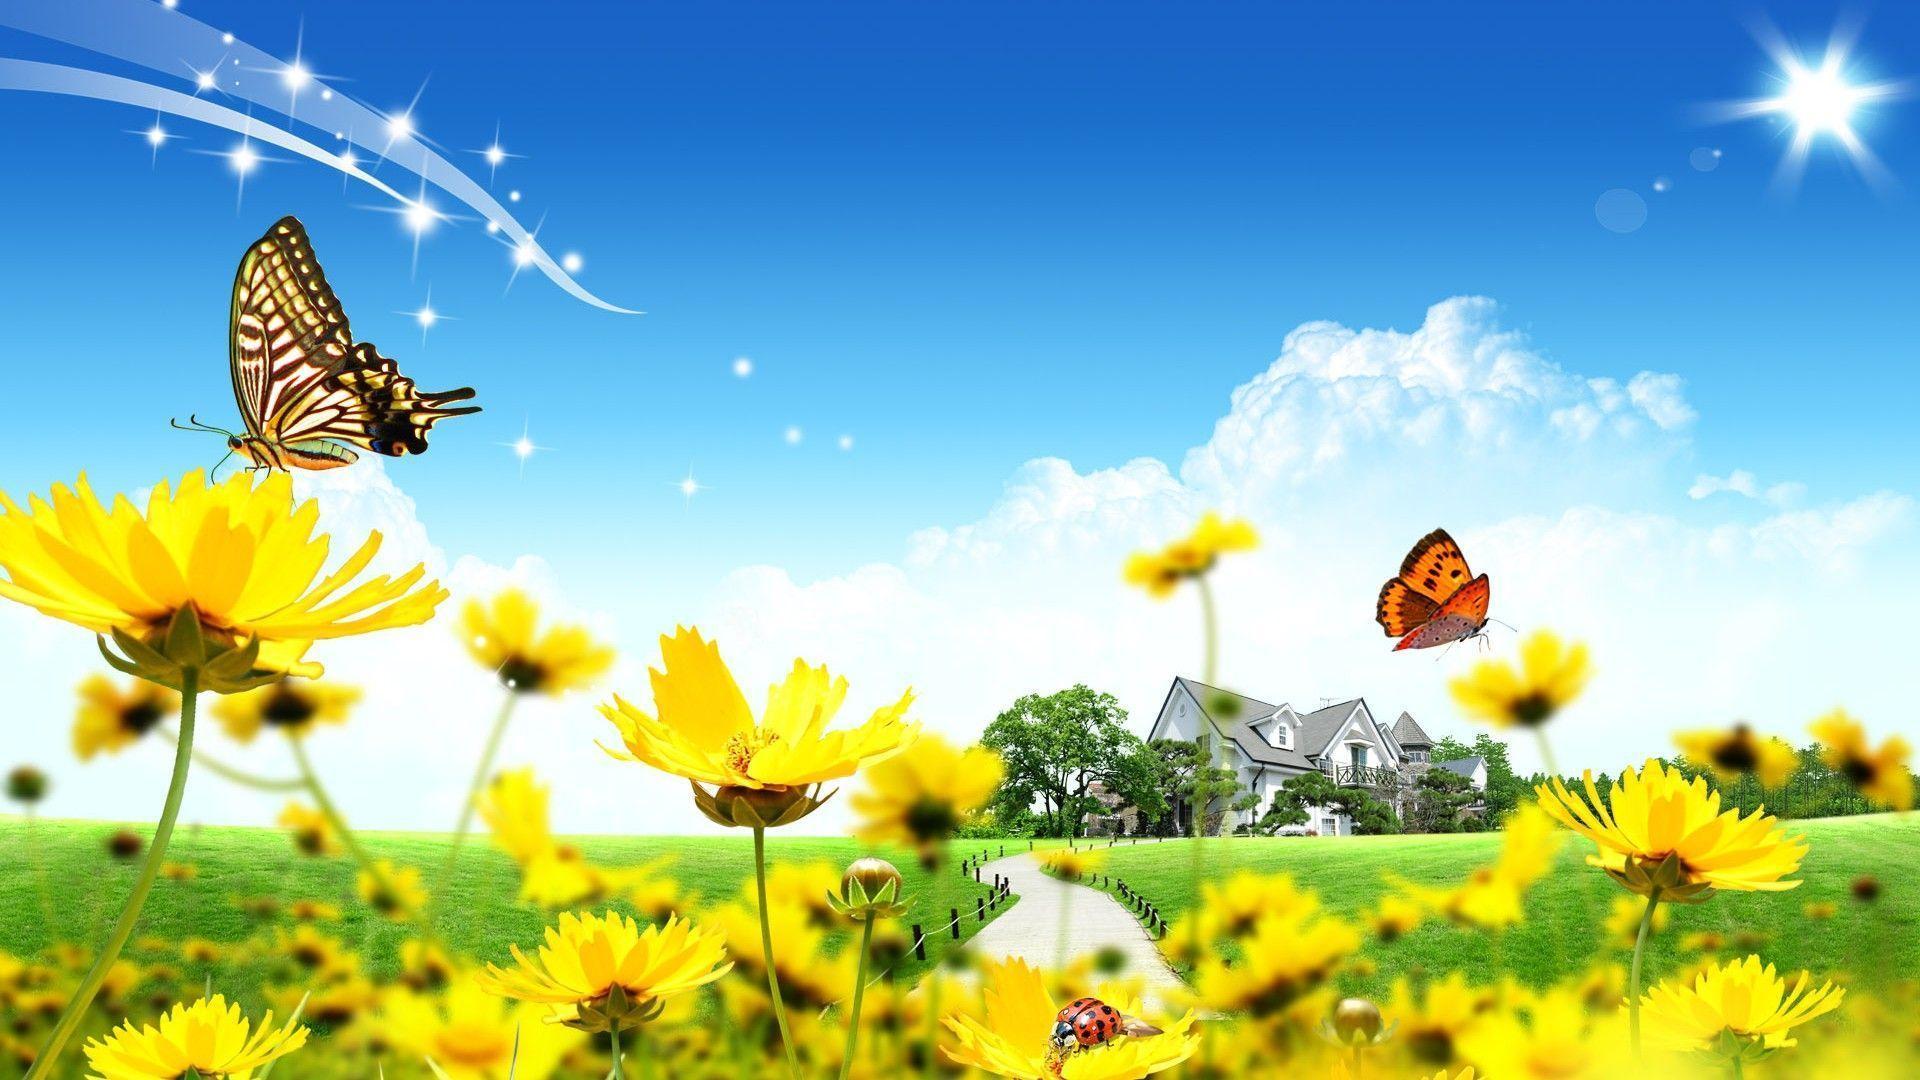 Sunny spring Windows 8 Theme and HD Background. Download